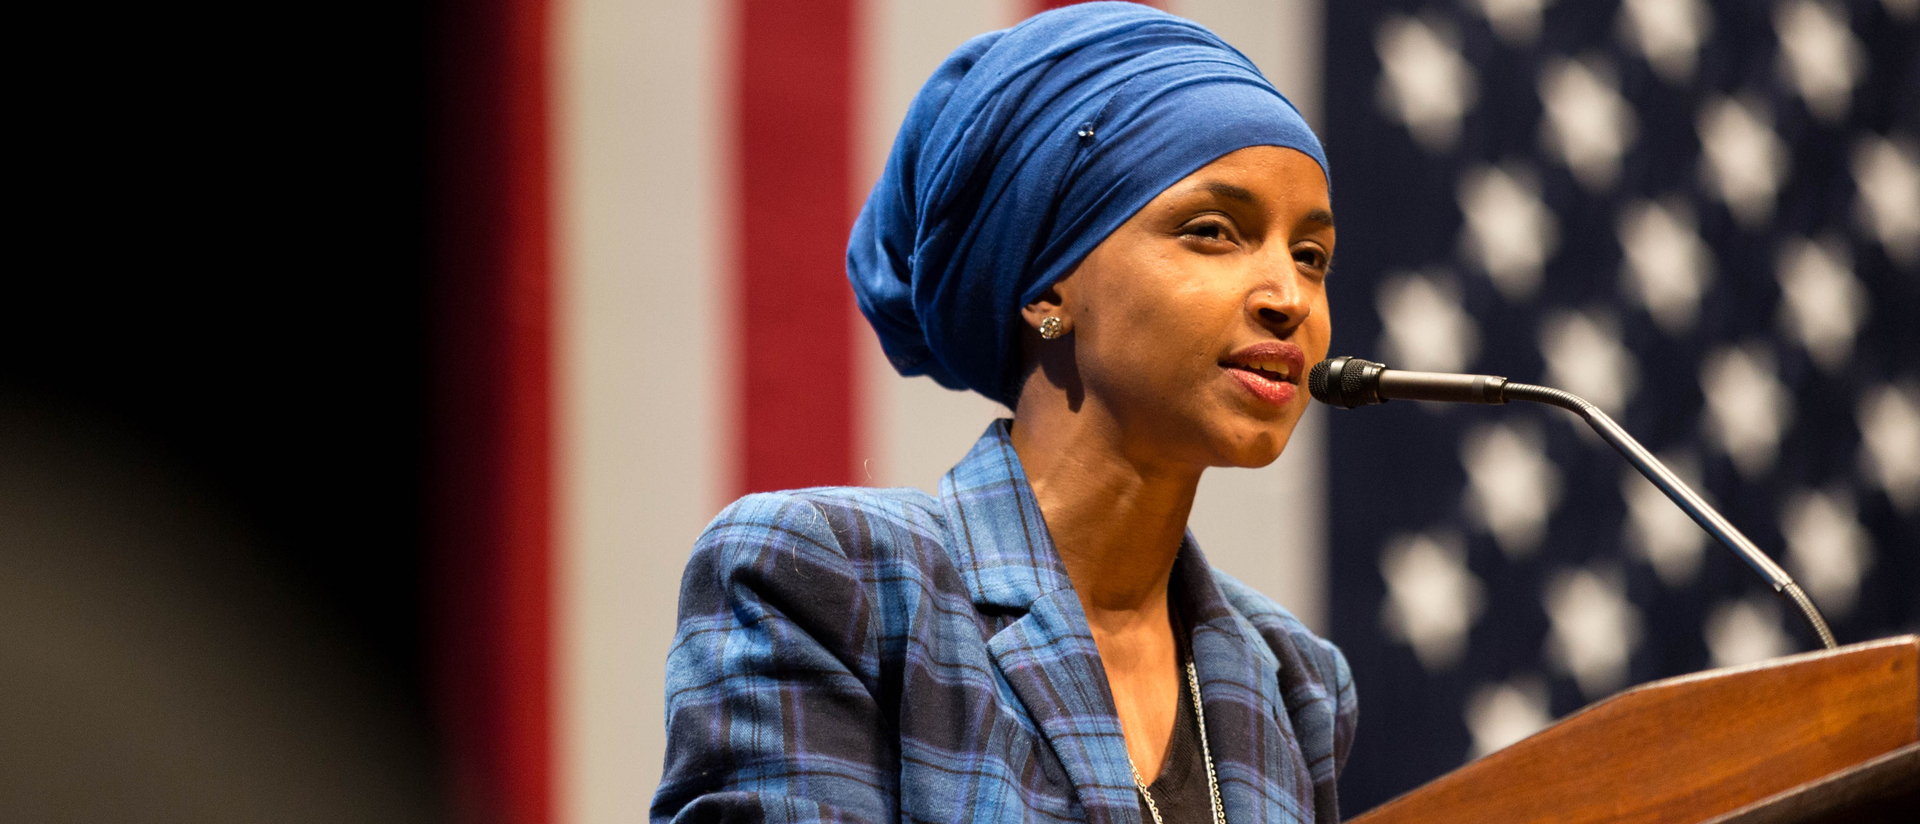 Rep. Ilhan Omar, the first Somali-American elected lawmaker in the country.